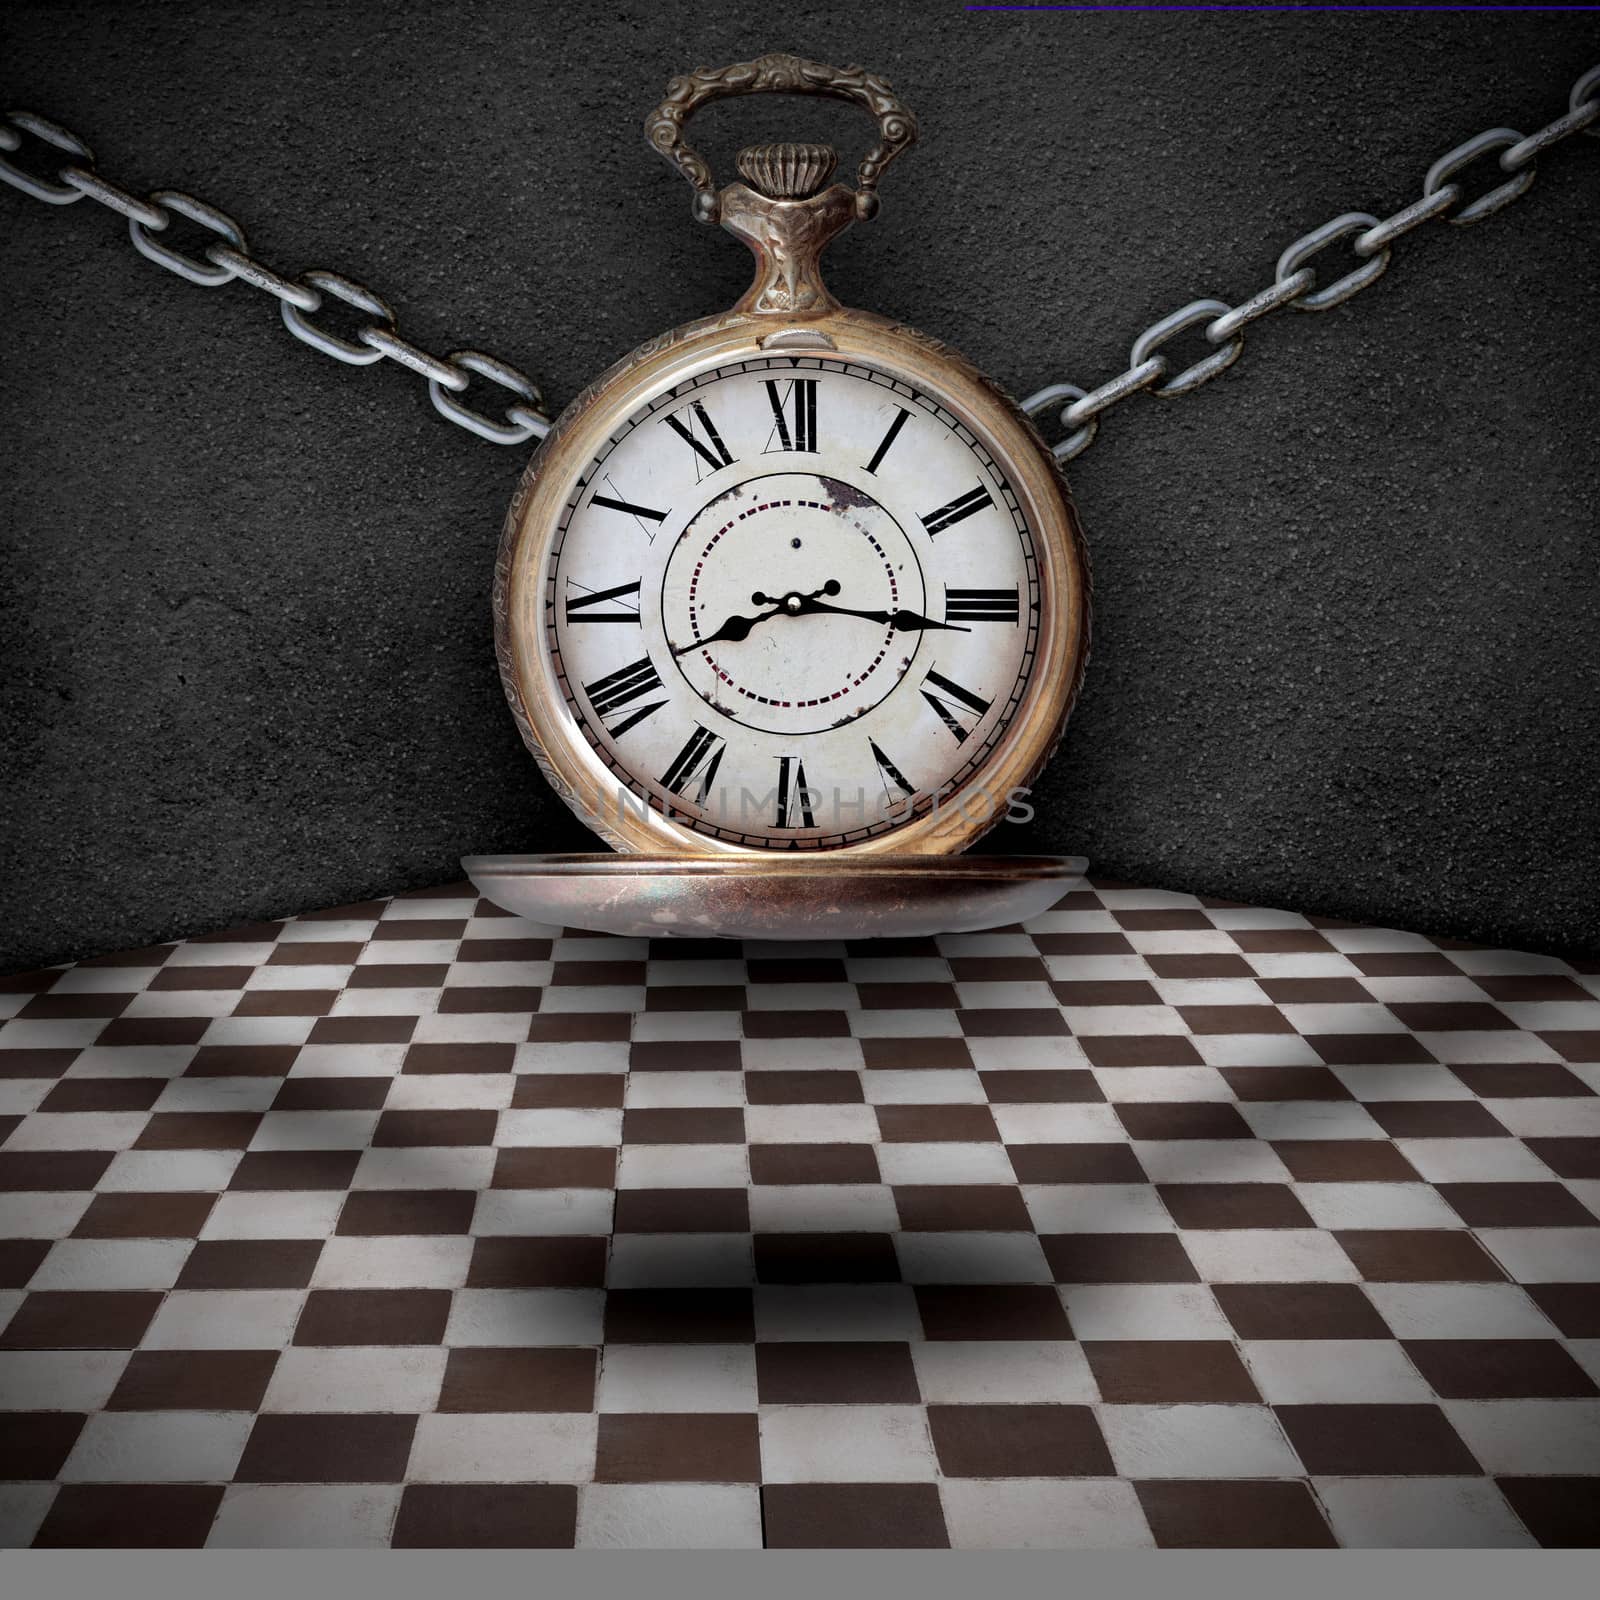 concept of trapping time, a clock tied with chains